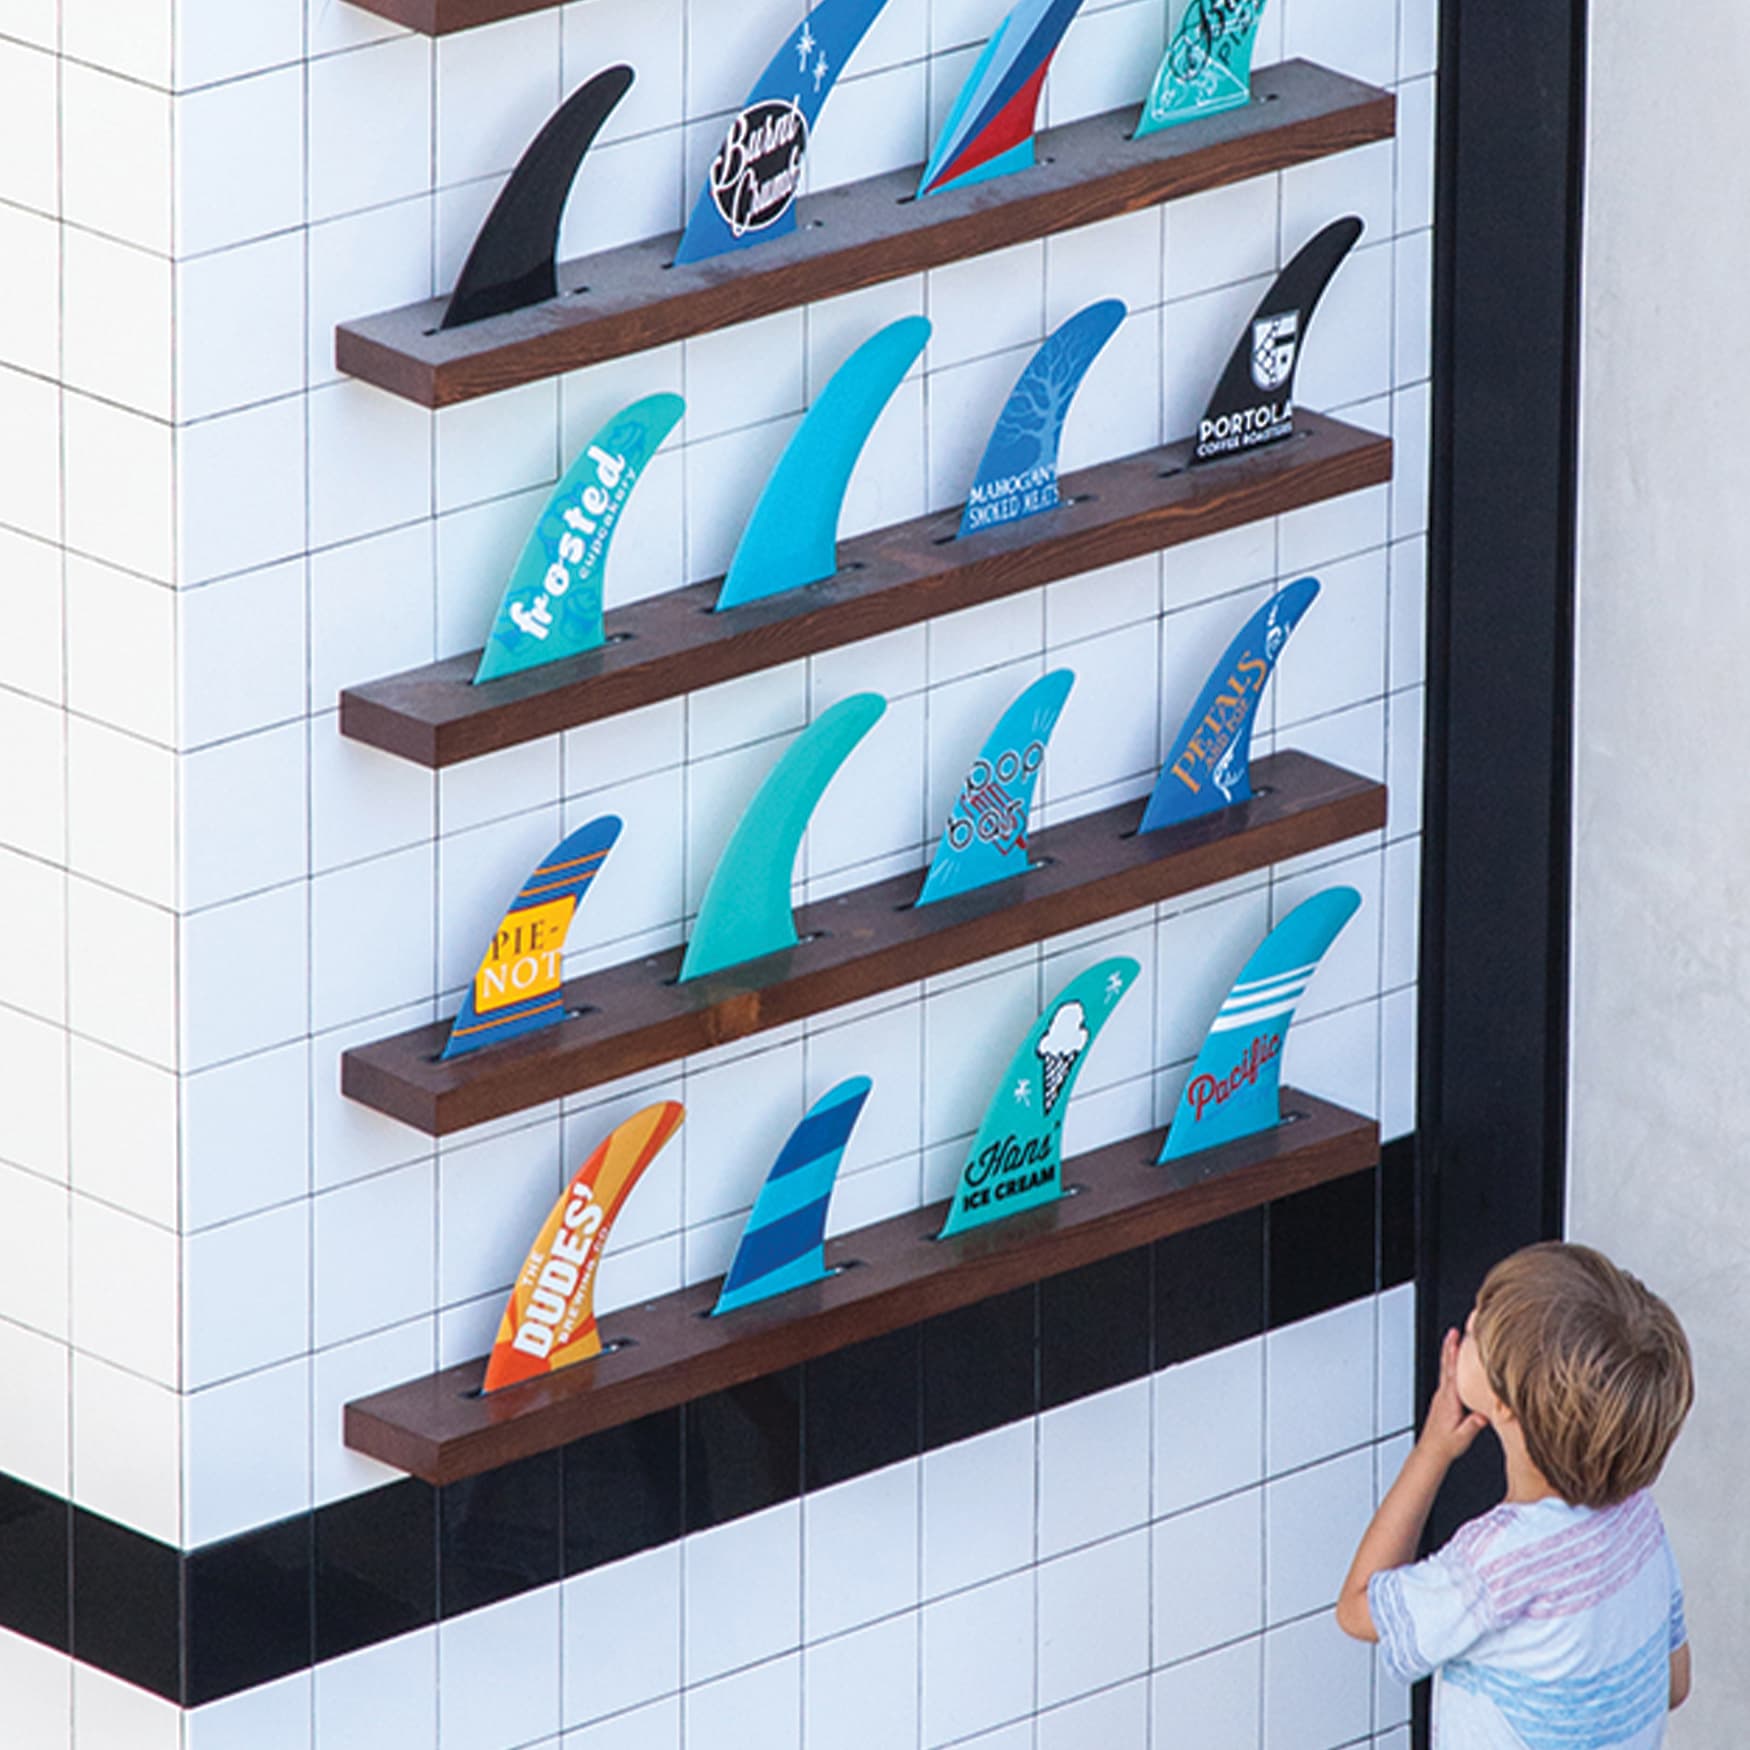 Pacific City specialty graphic installation of surf fins lined up on a wall covered in art and project information.